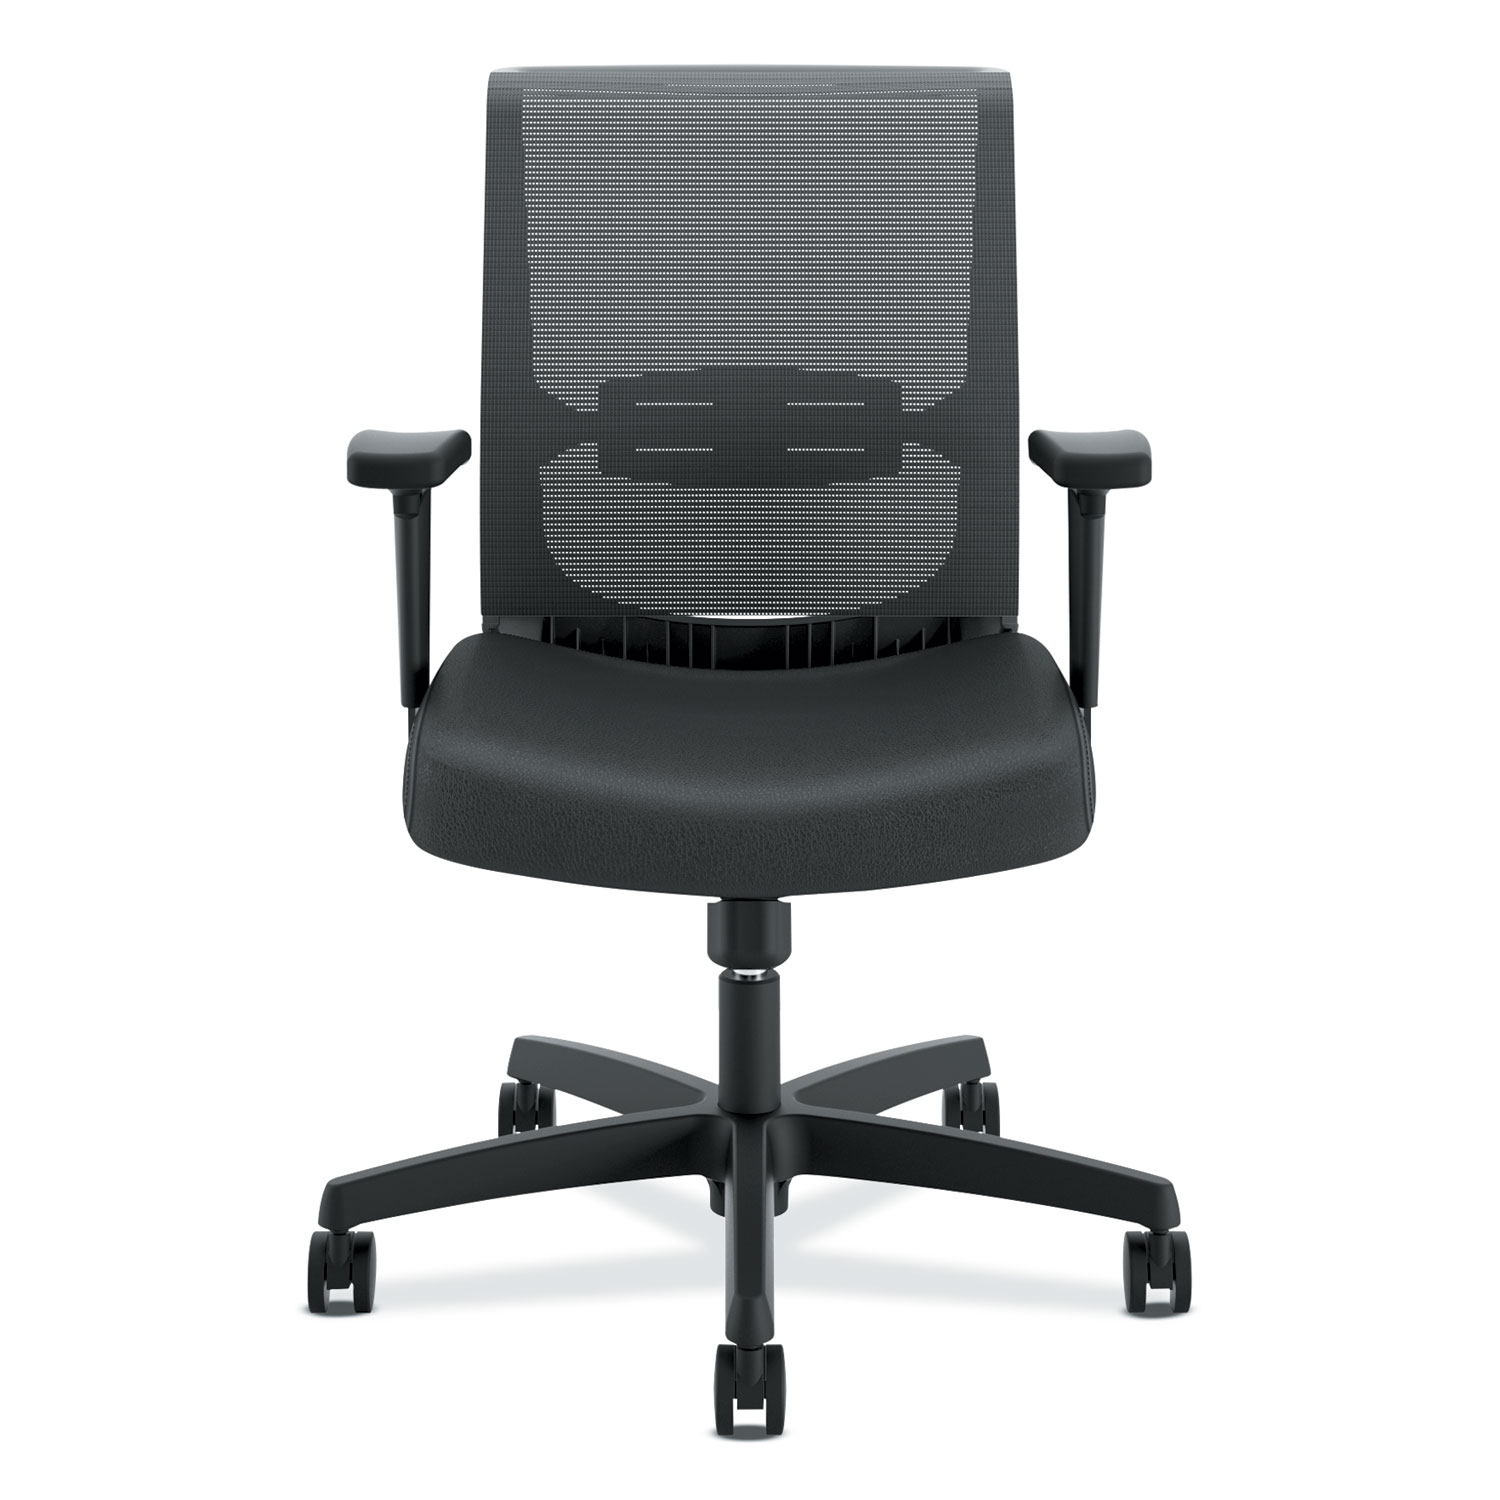  HON HONCMS1AUR10 Convergence Mid-Back Task Chair with Swivel-Tilt Control, Supports up to 275 lbs, Vinyl, Black Seat/Back, Black Base (HONCMS1AUR10) 